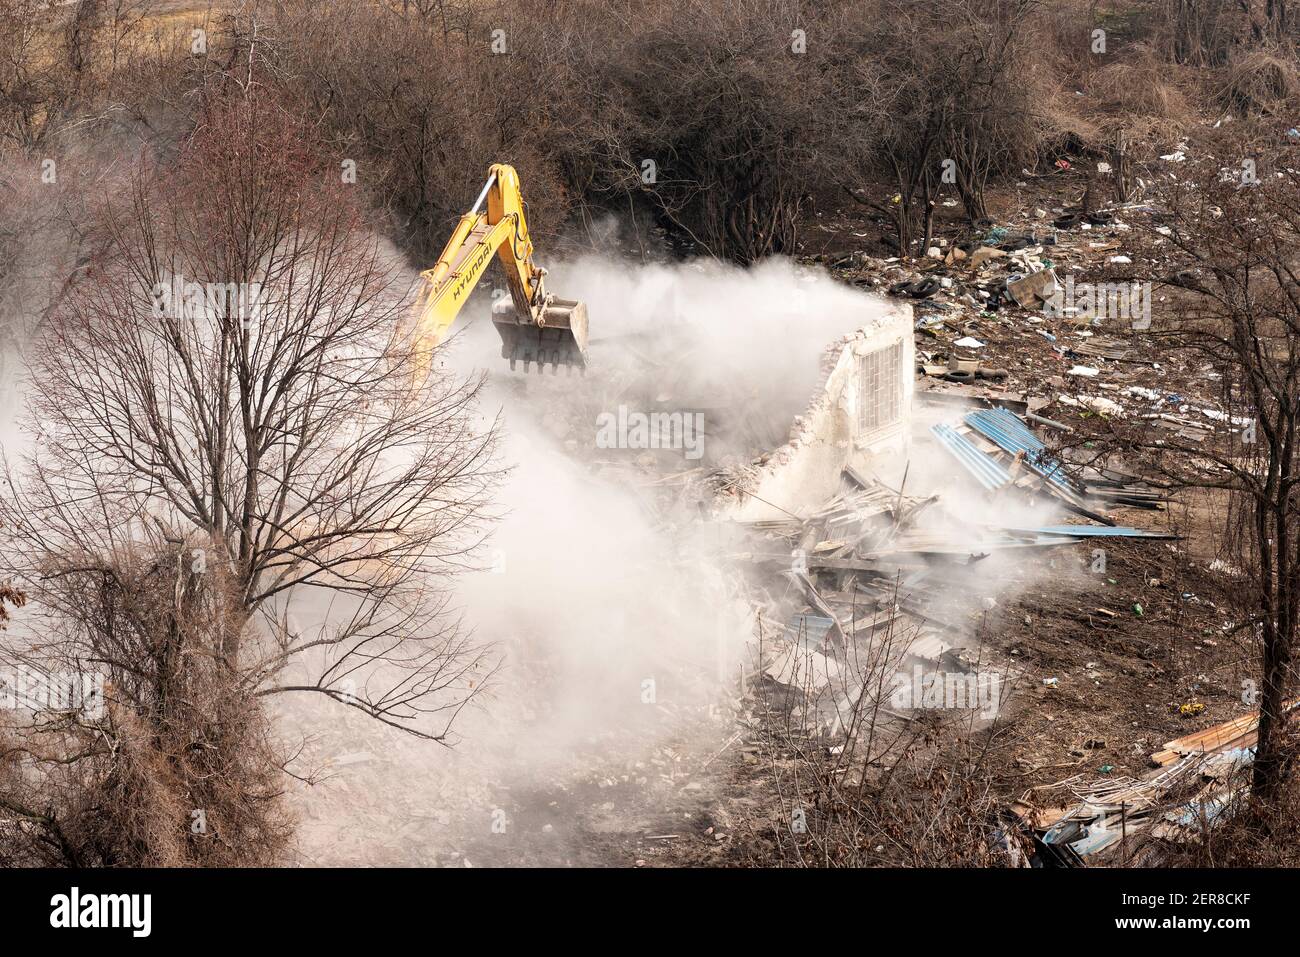 Building demolition Hyundai digger demolishing an old residential house and clearing a construction site in Sofia, Bulgaria, Eastern Europe, EU Stock Photo